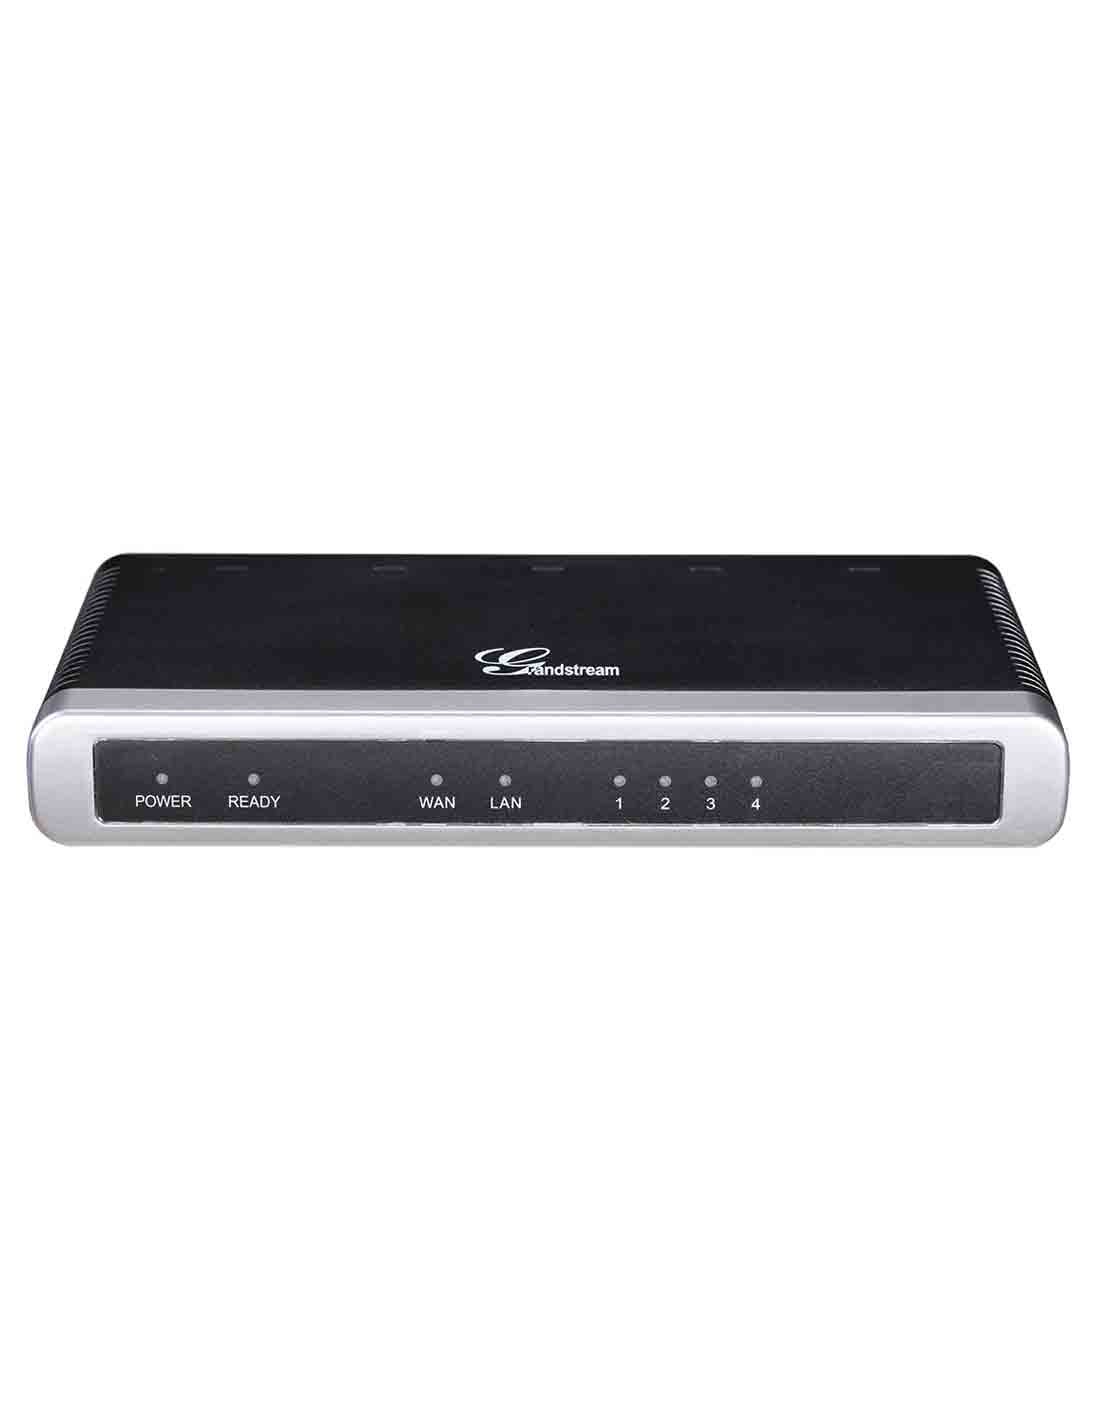 Grandstream GXW4104 FXO Gateway at a cheap price and free delivery in Dubai